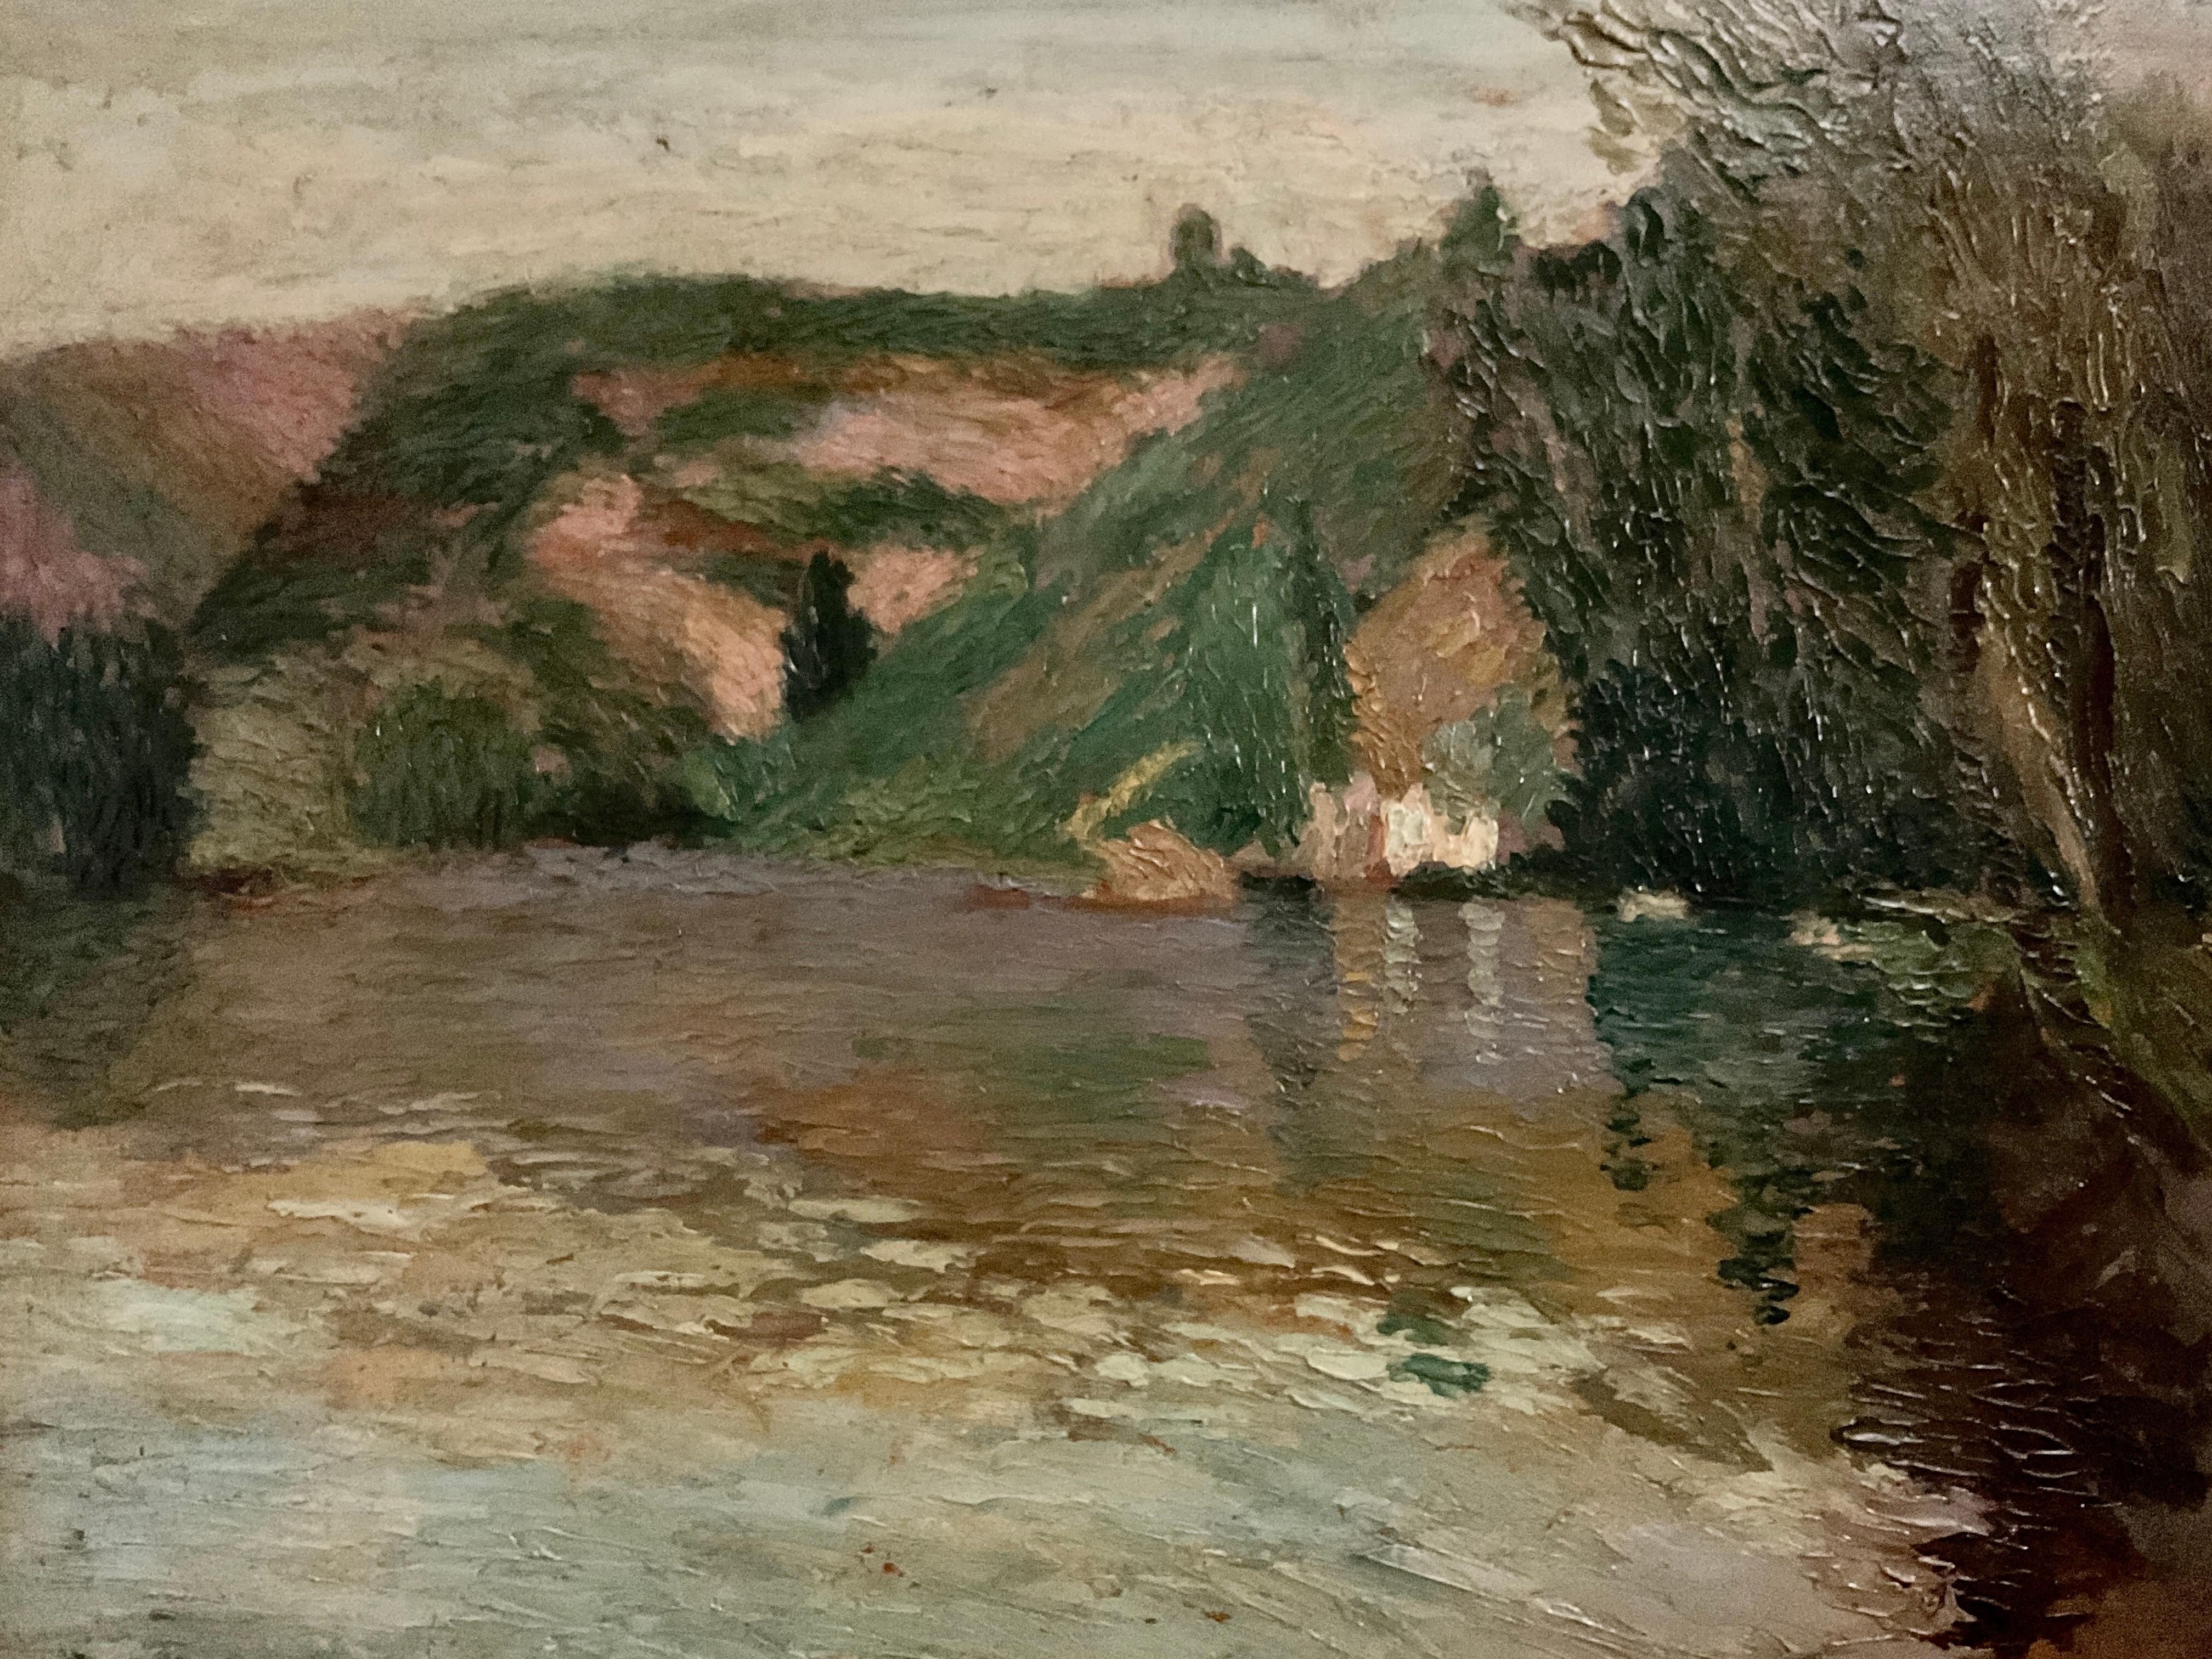 This beautiful French impressionist painting on wood panel is a lake or river scene most likely in the south of France. The dappled reflections in the water are pure impressionist in style. The colors and brushstrokes are also typical of the early